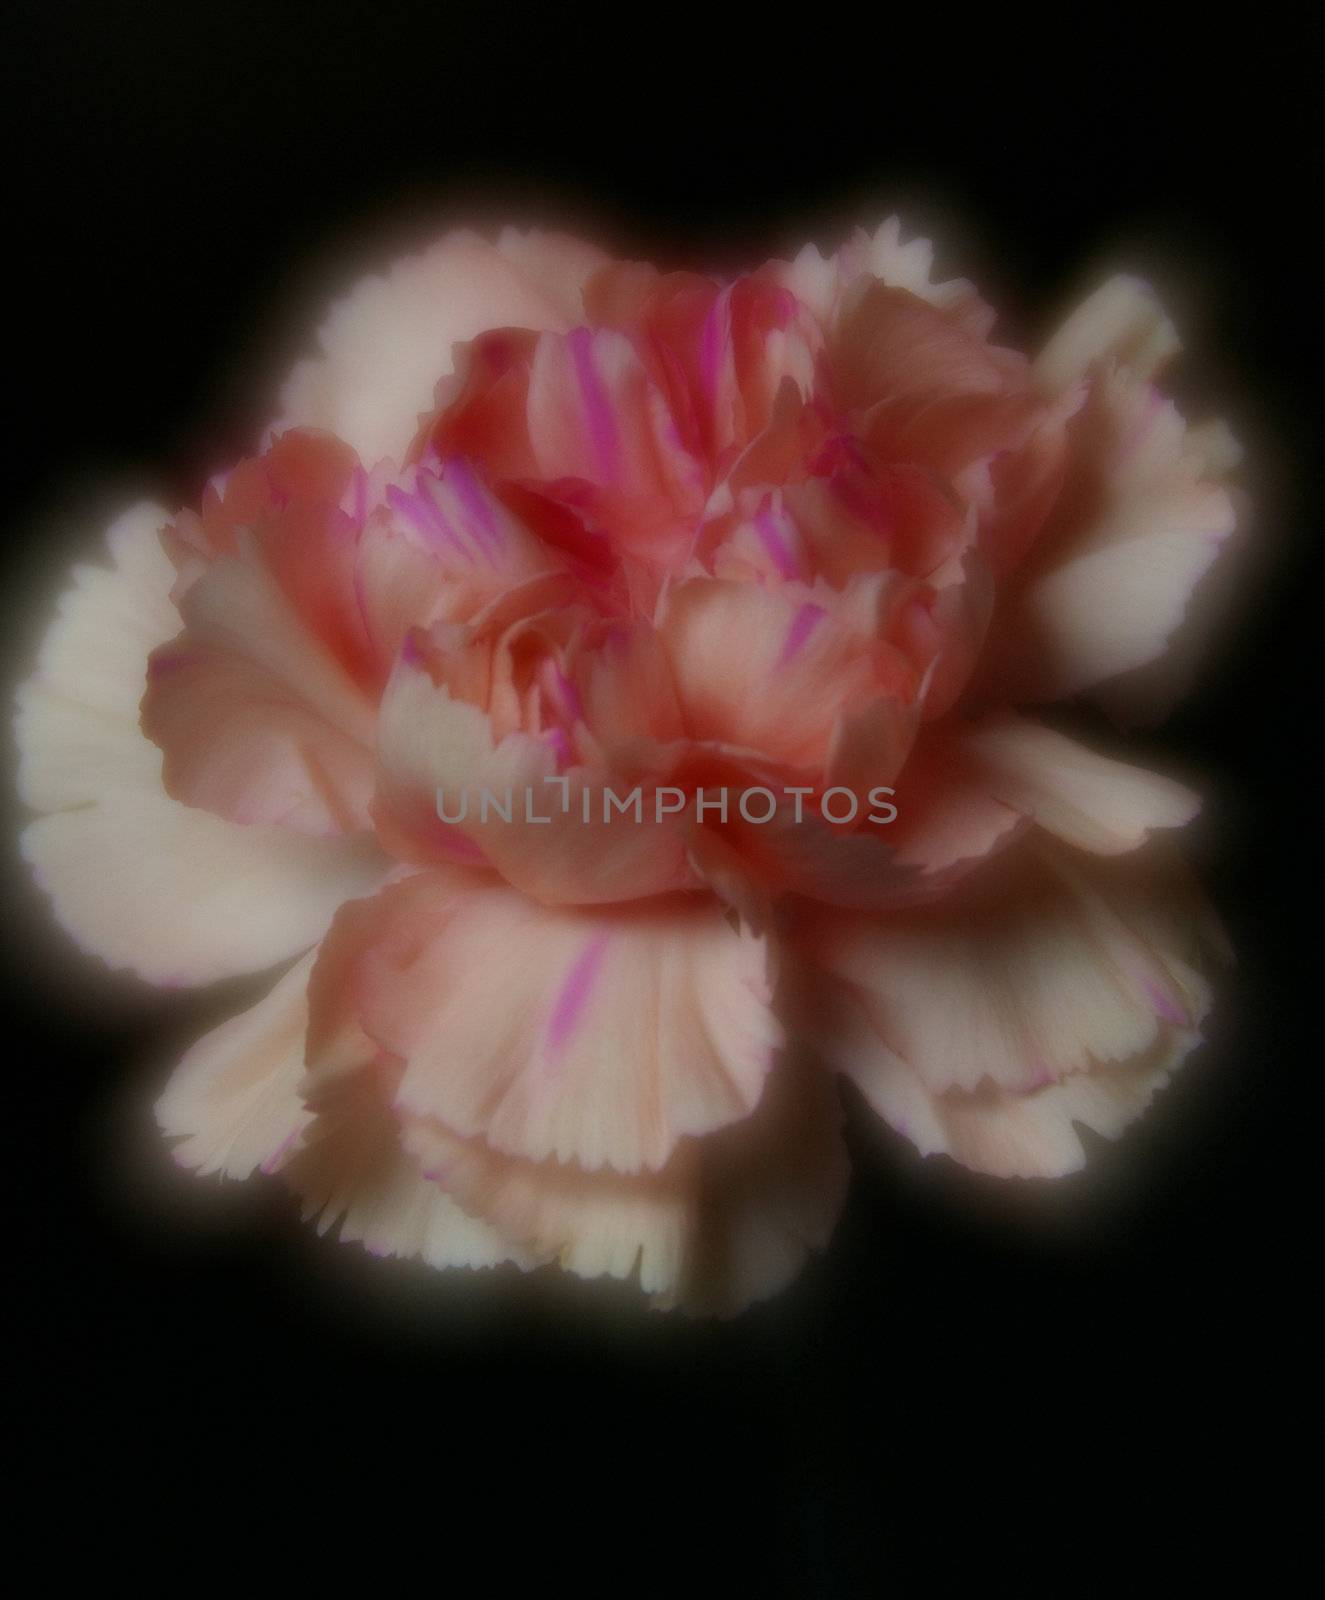 A pink and white carnation on a black ground, a soft focus image.